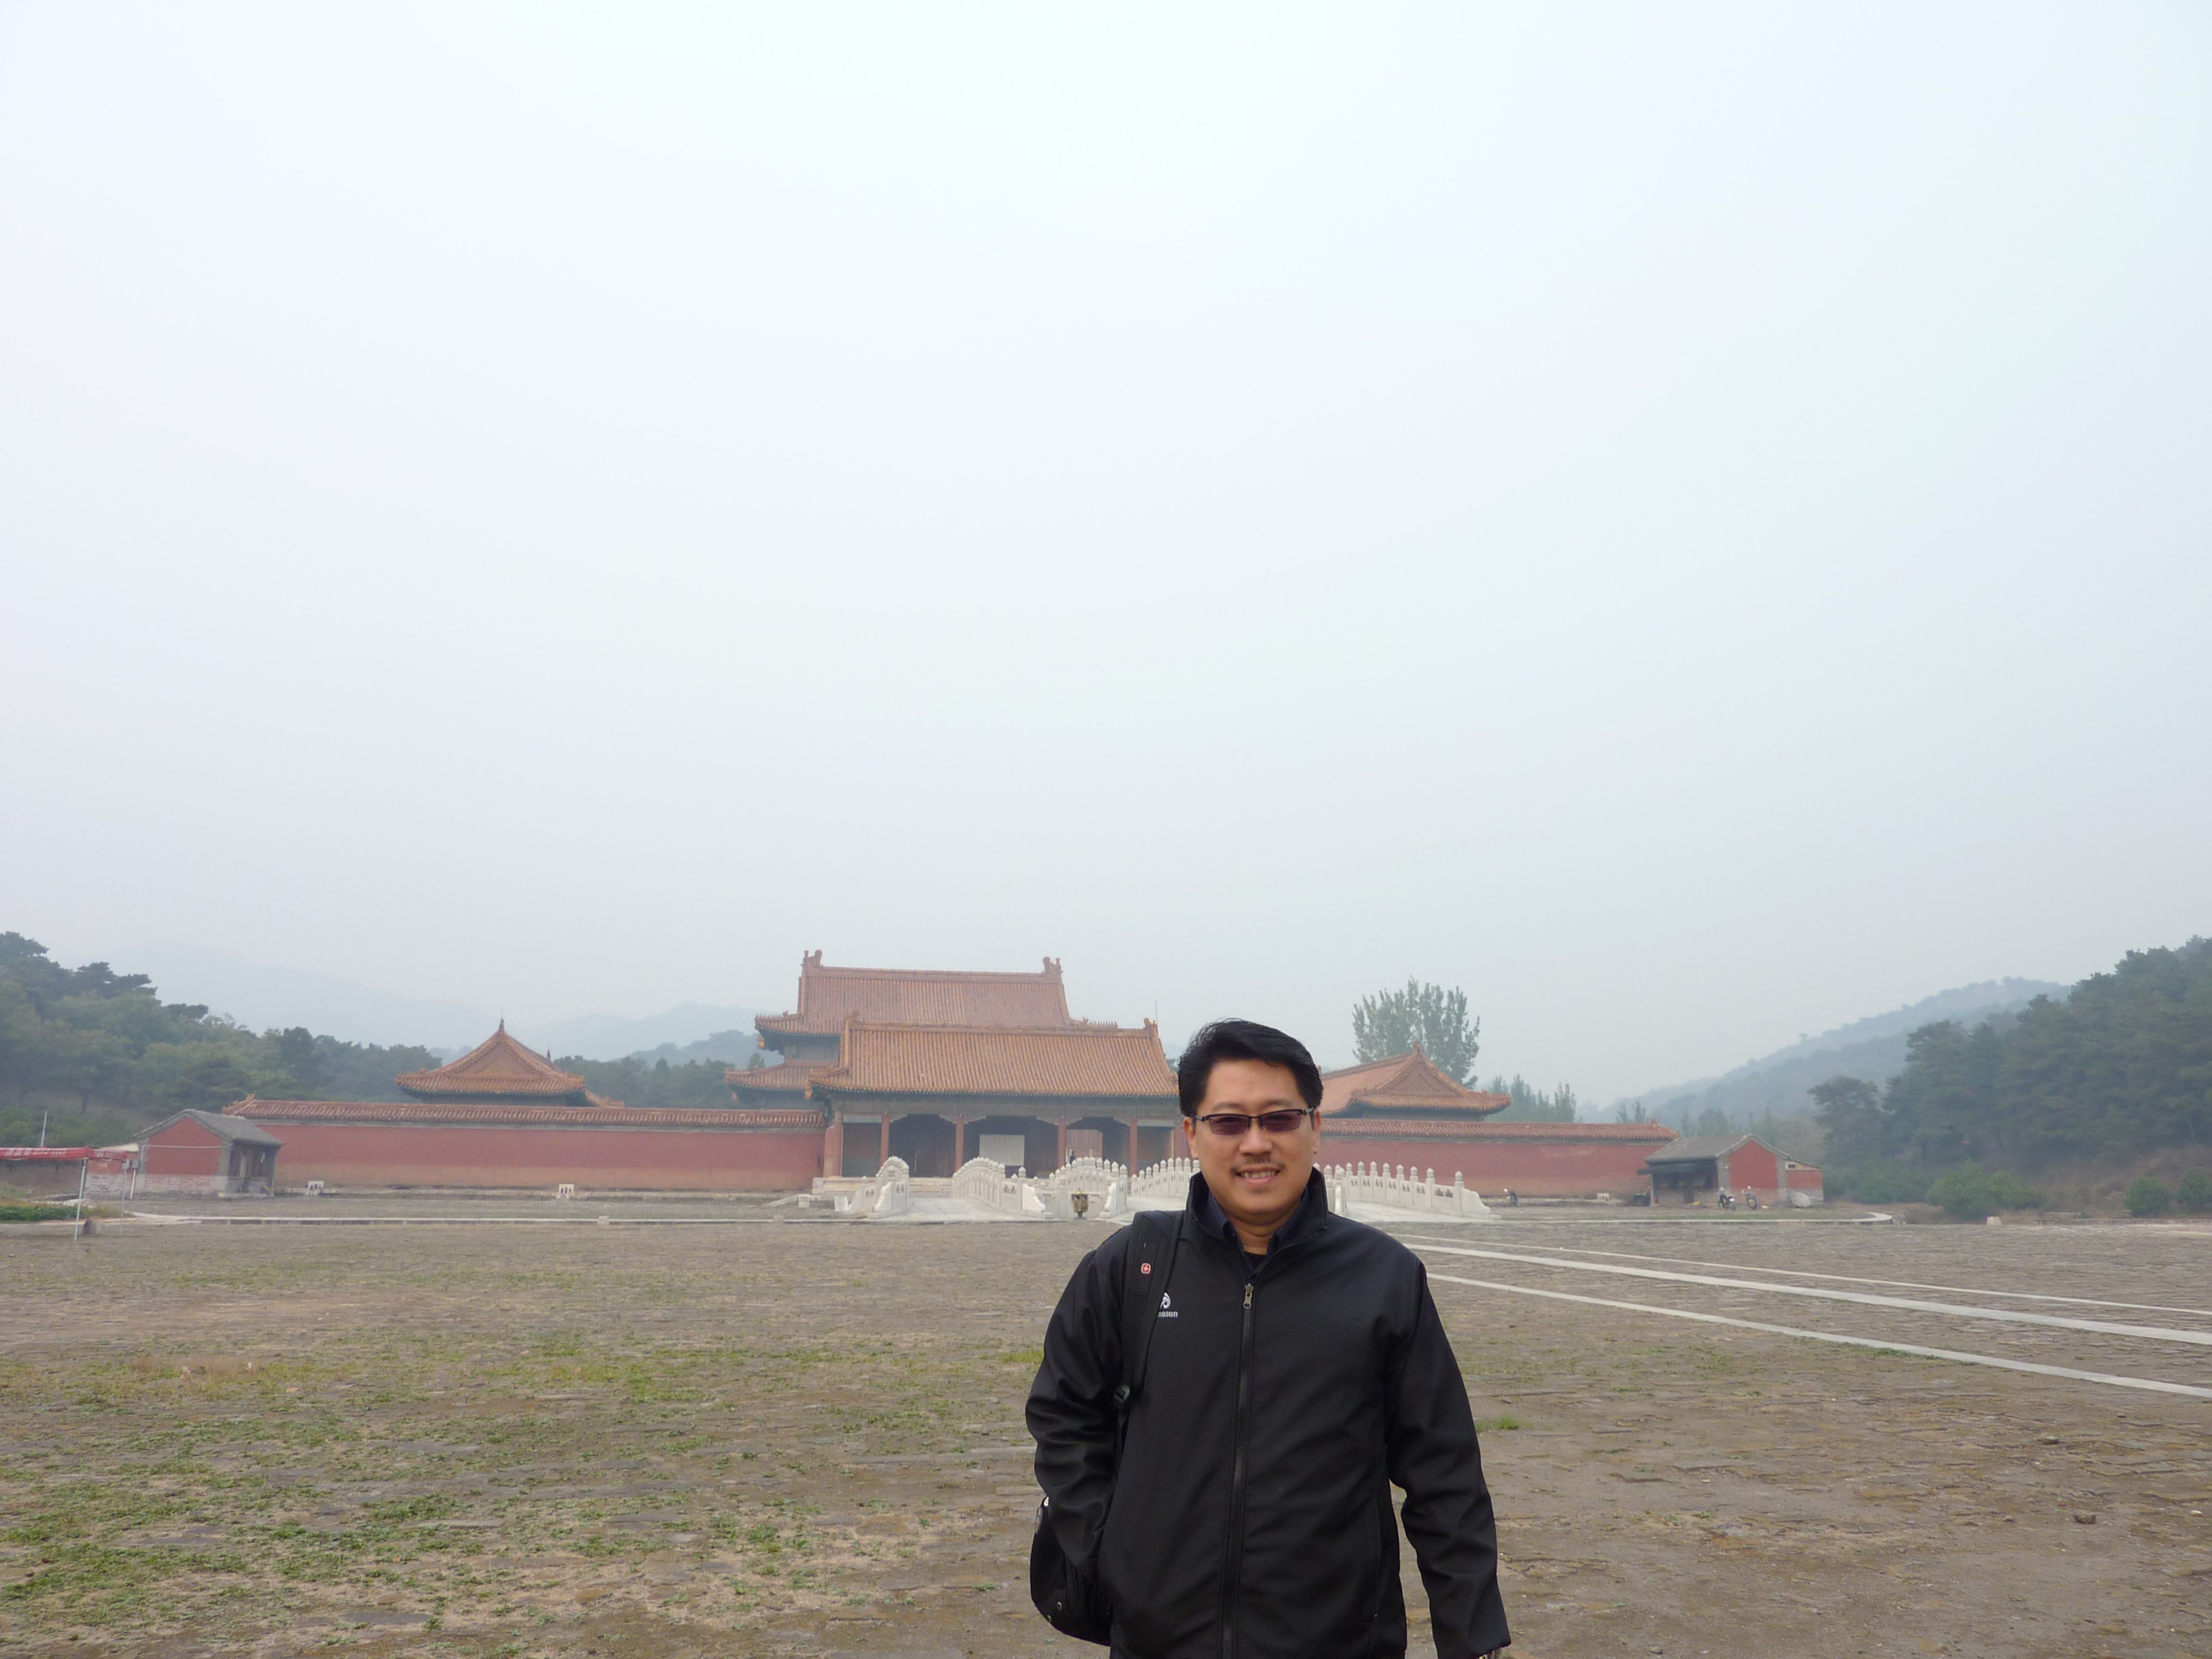 Master Soon in Hebei, China Oct 2011. This 2 weeks Trip was meant for understanding the Might of China as a World Power.